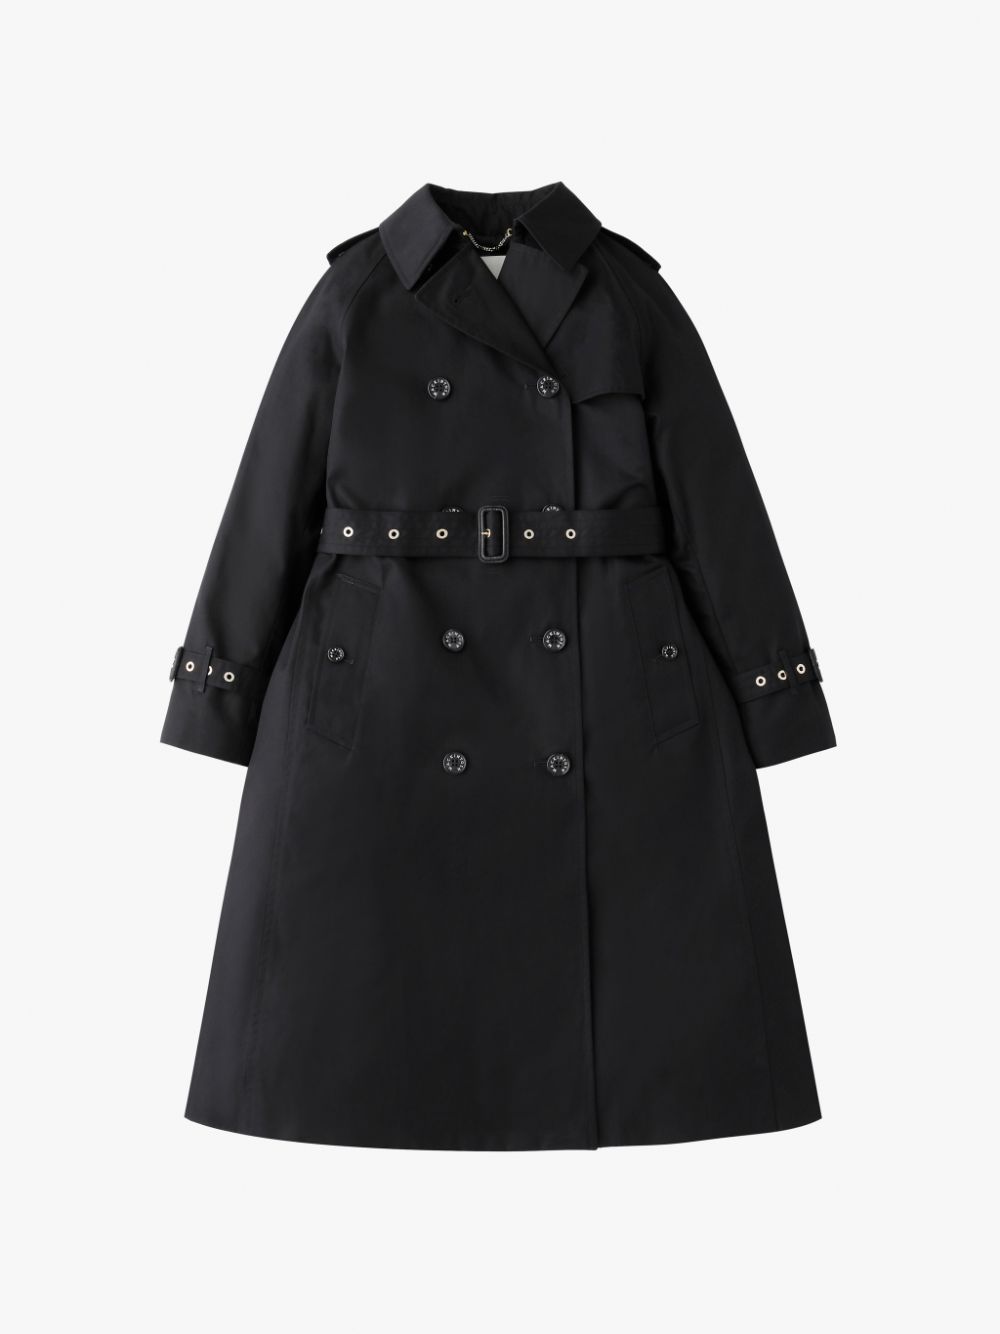 FOREST CLASSIC MAXI TRENCH COAT BLACK | LM-1013F | MACKINTOSH